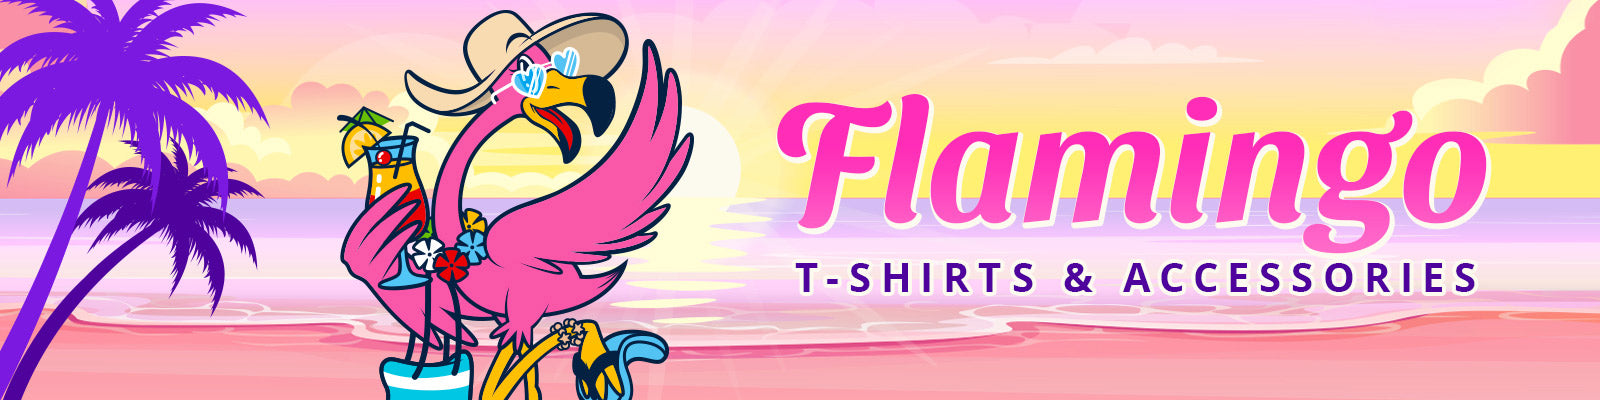 Flamingo T-Shirts & Accessories Looking for a Flamingo T-Shirt or Flamingo Accessories? We have all kinds of Flamingo Items For you! Flamingo T-Shirts, Flamingo Tumblers, Flamingo Bags & More.